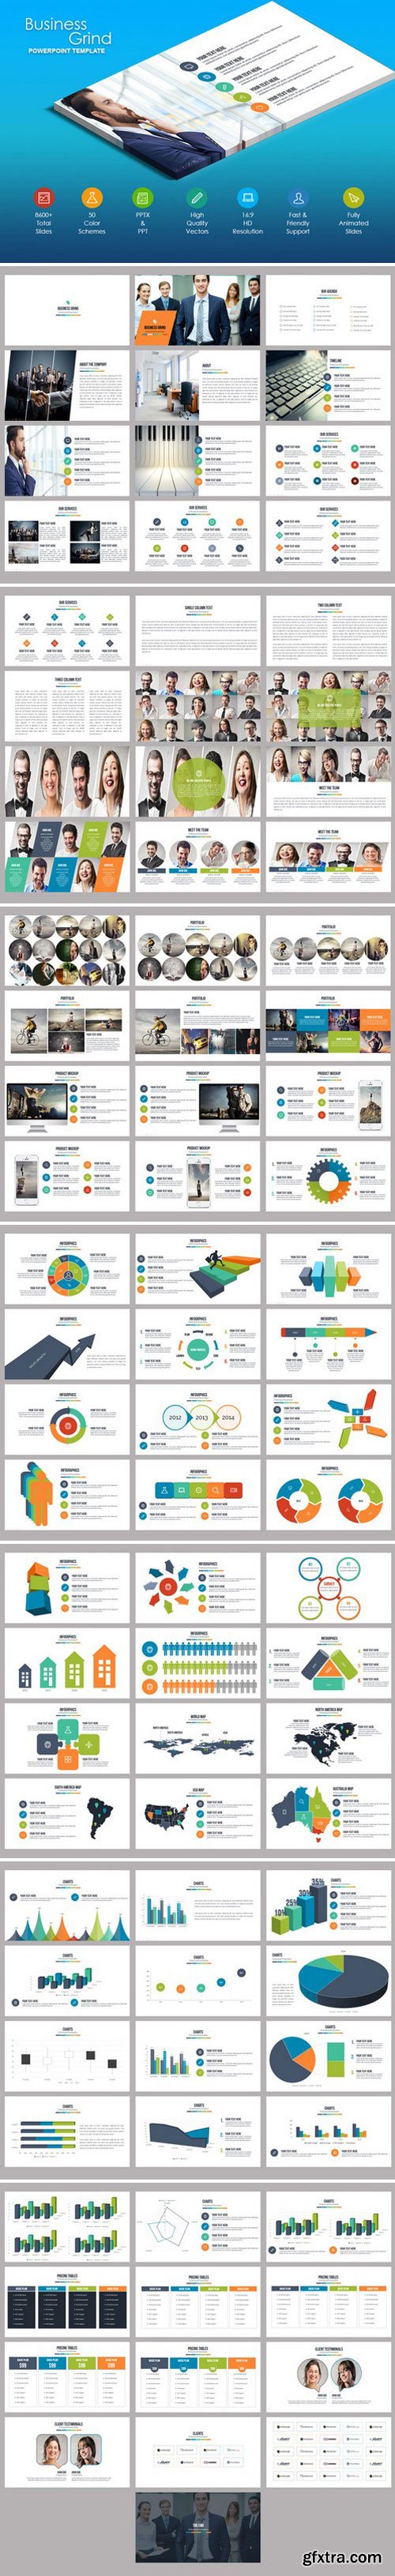 CM - Business Grind Powerpoint Template 785188